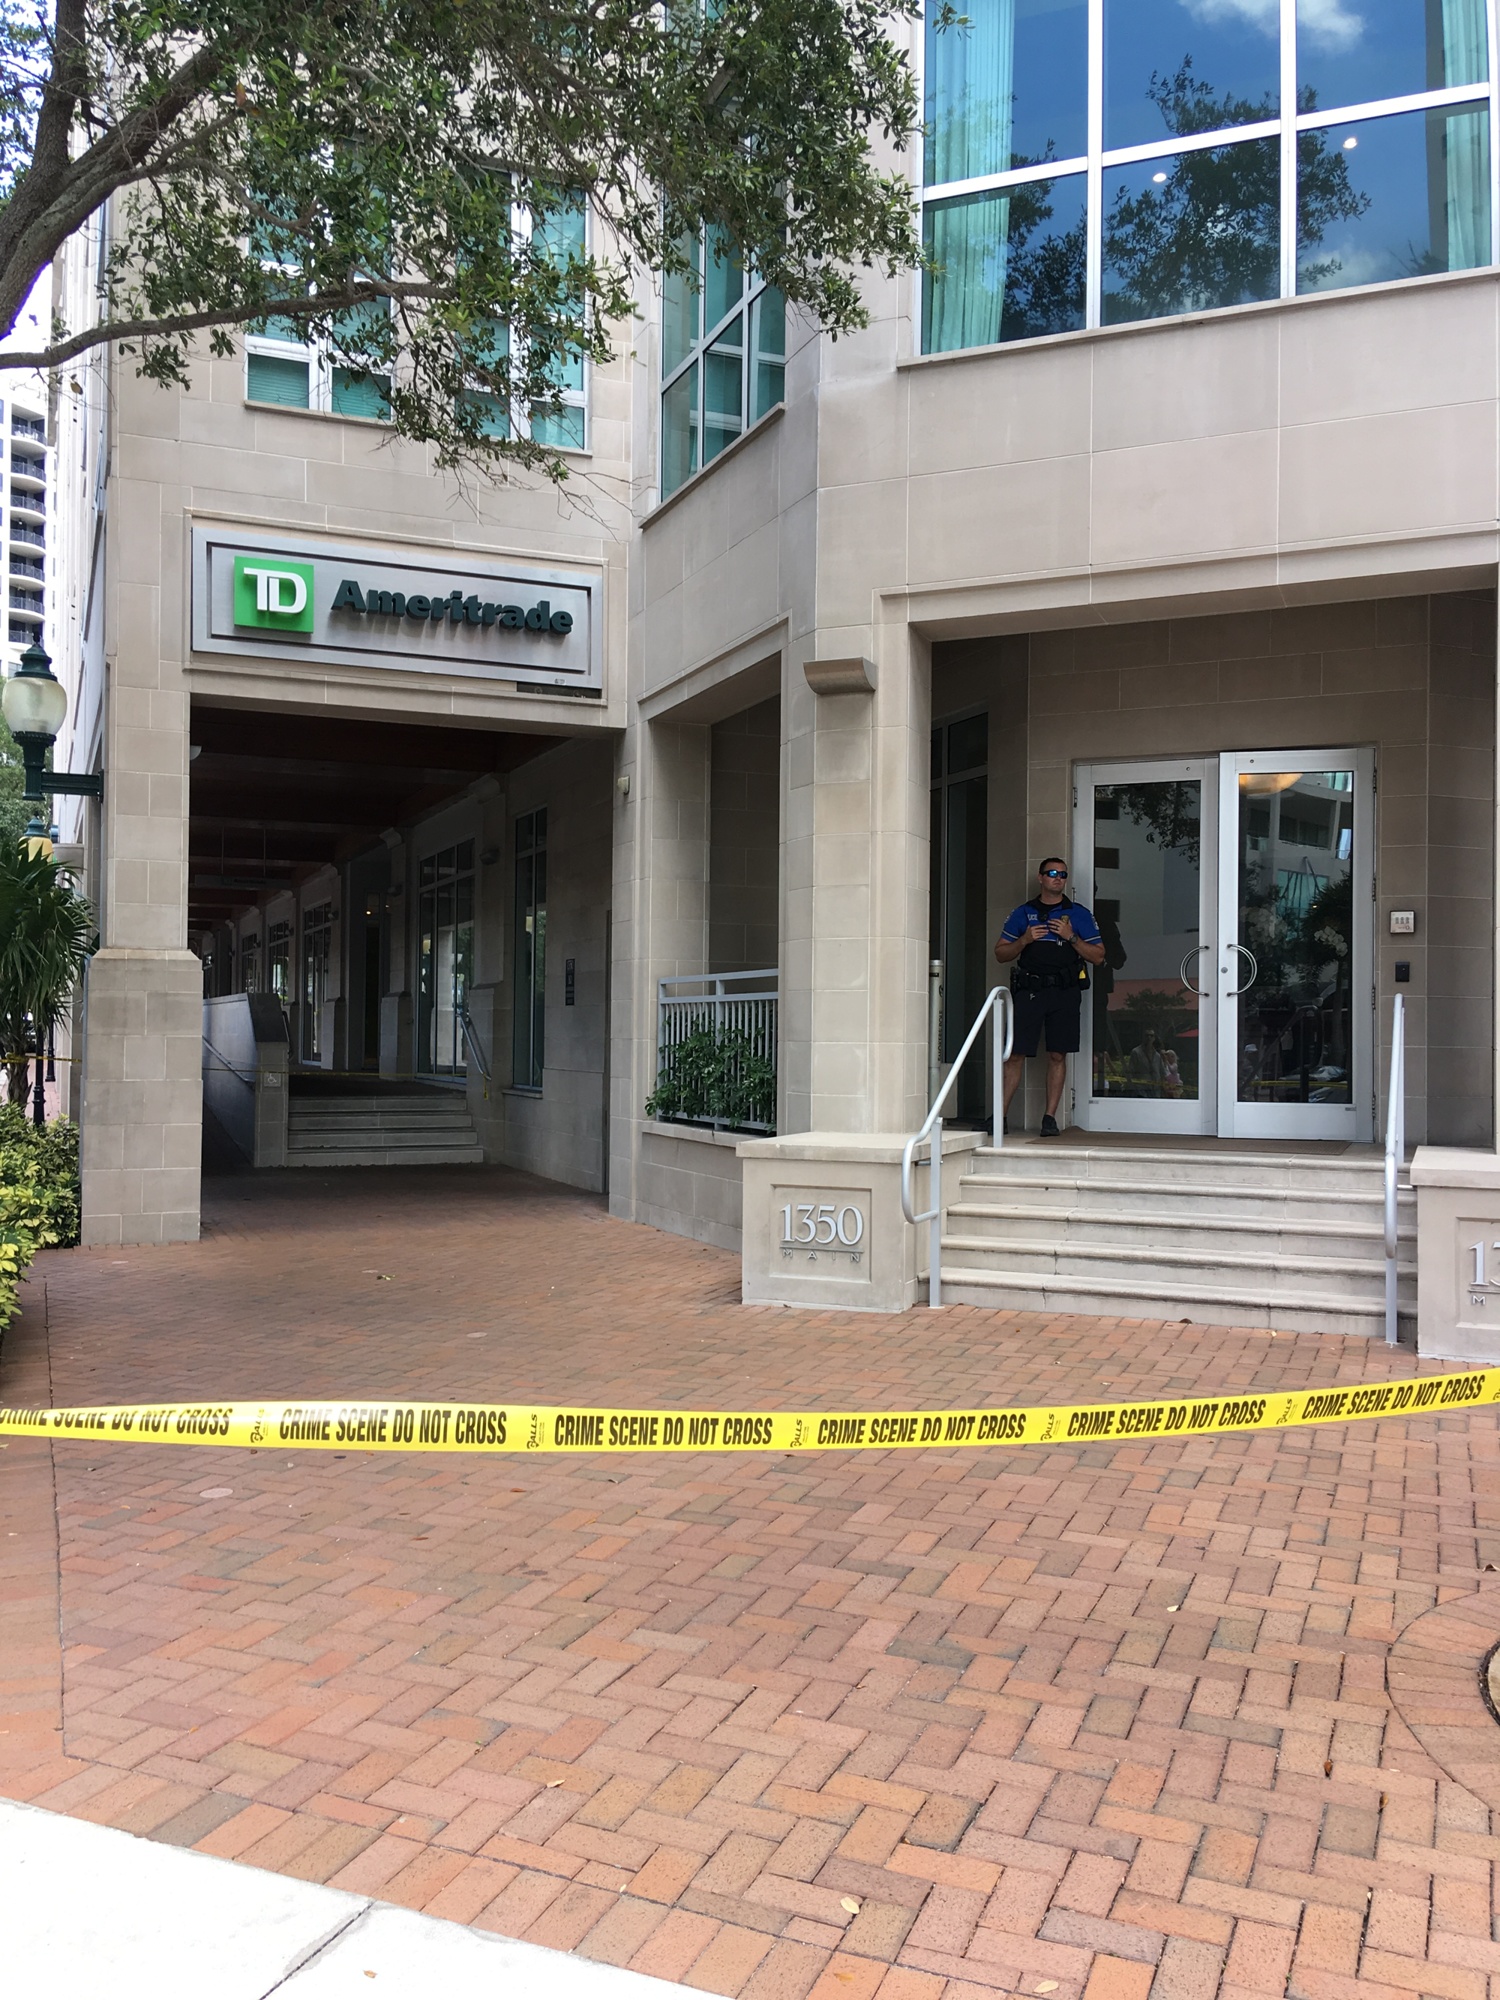 The police taped off the entrance to 1350 Main this afternoon while investigating the shooting.